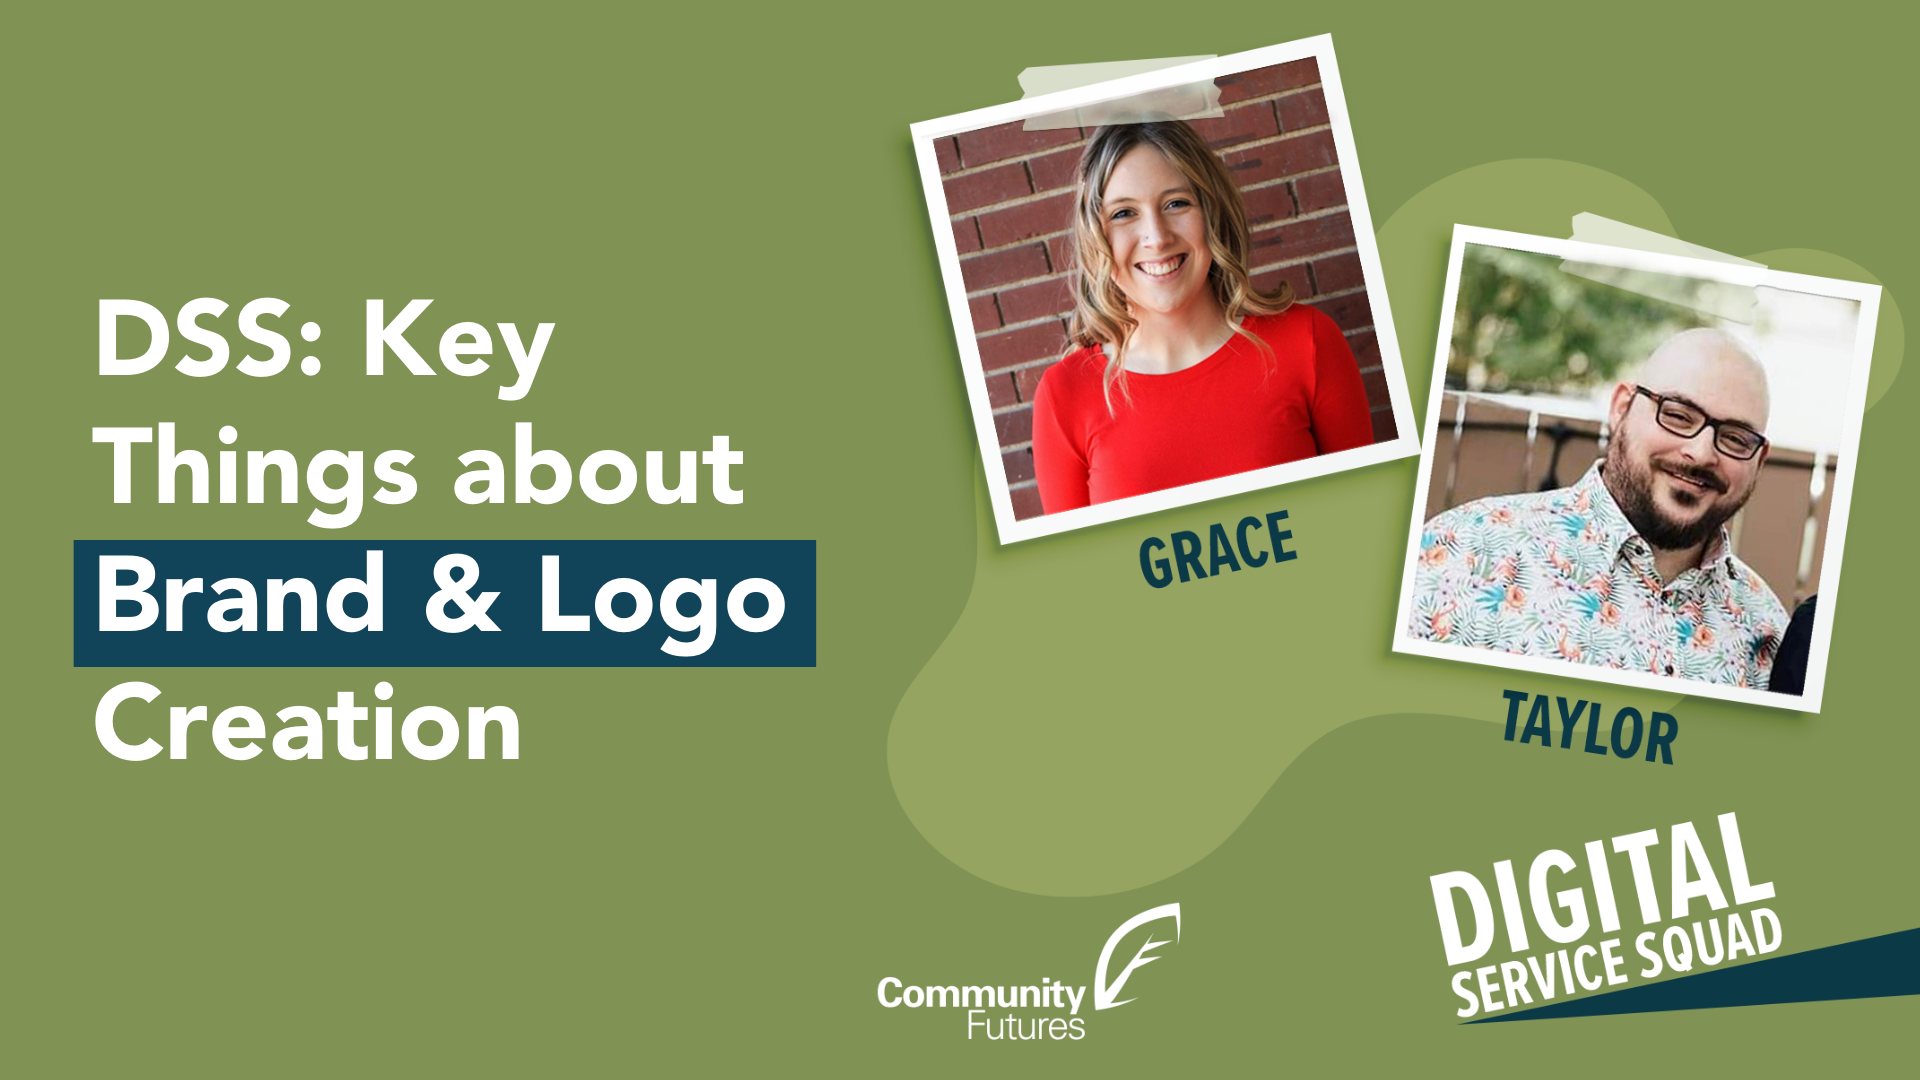 DSS: Key Things about Brand & Logo Creation